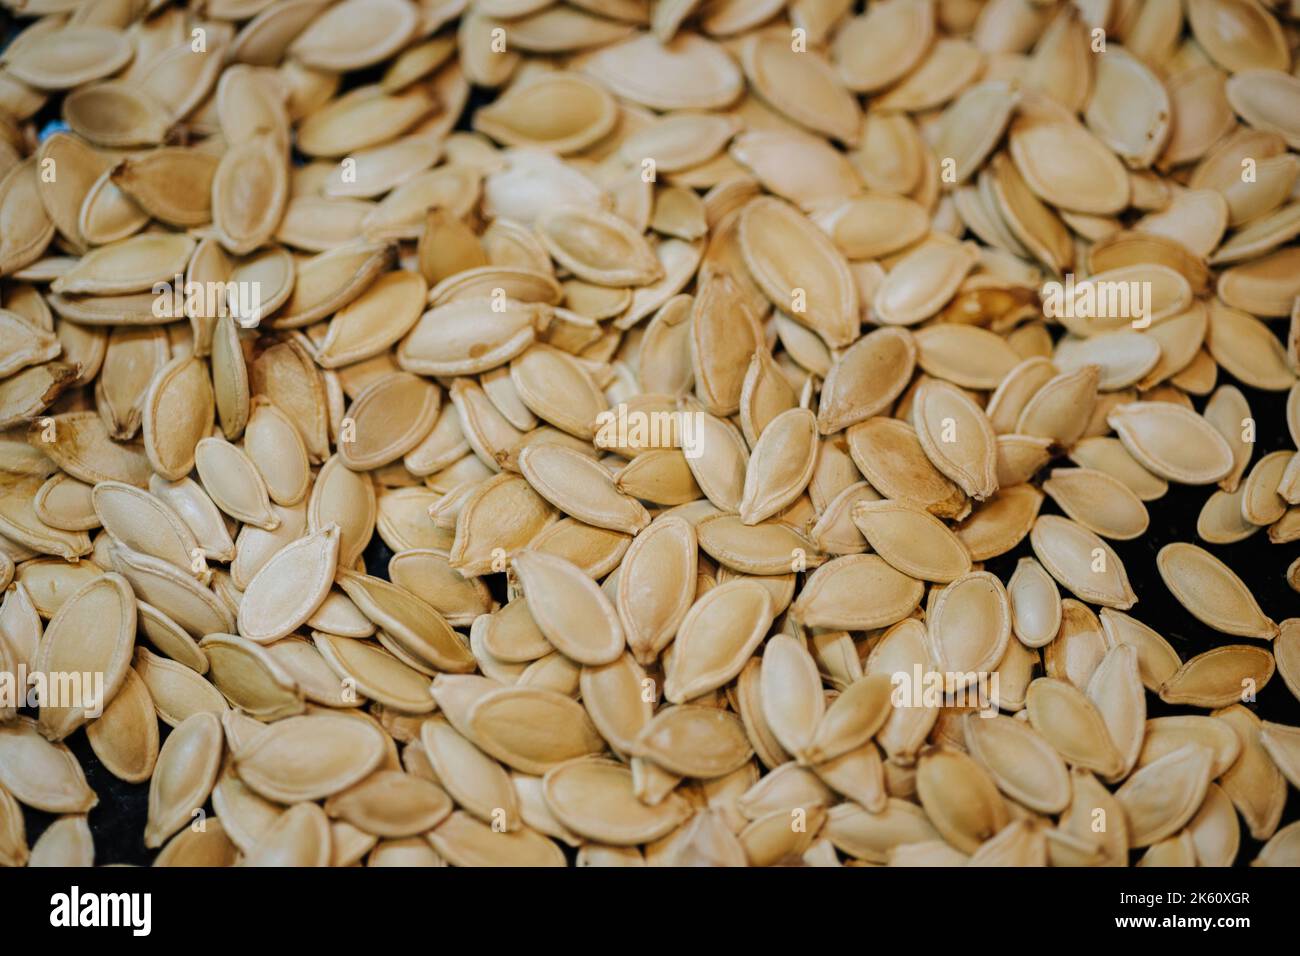 Scattered across the baking sheet roasted pumpkin seeds in shell Stock Photo